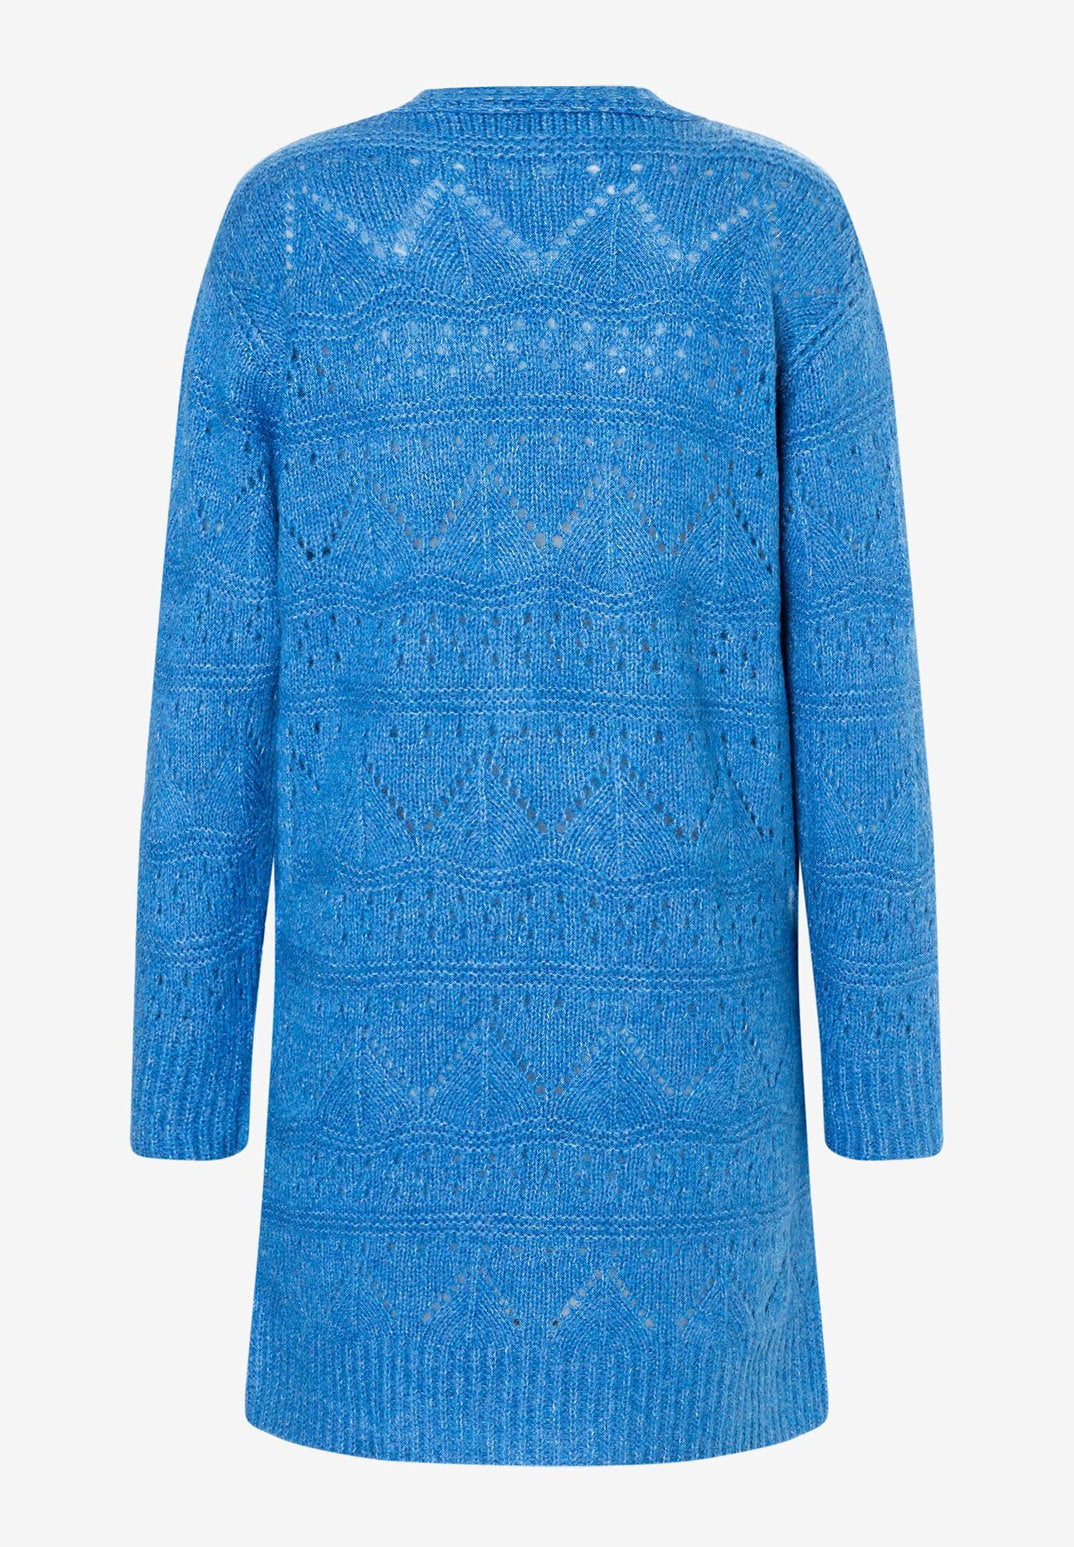 Blue Cardigan With Openwork Pattern_31111200_0338_05